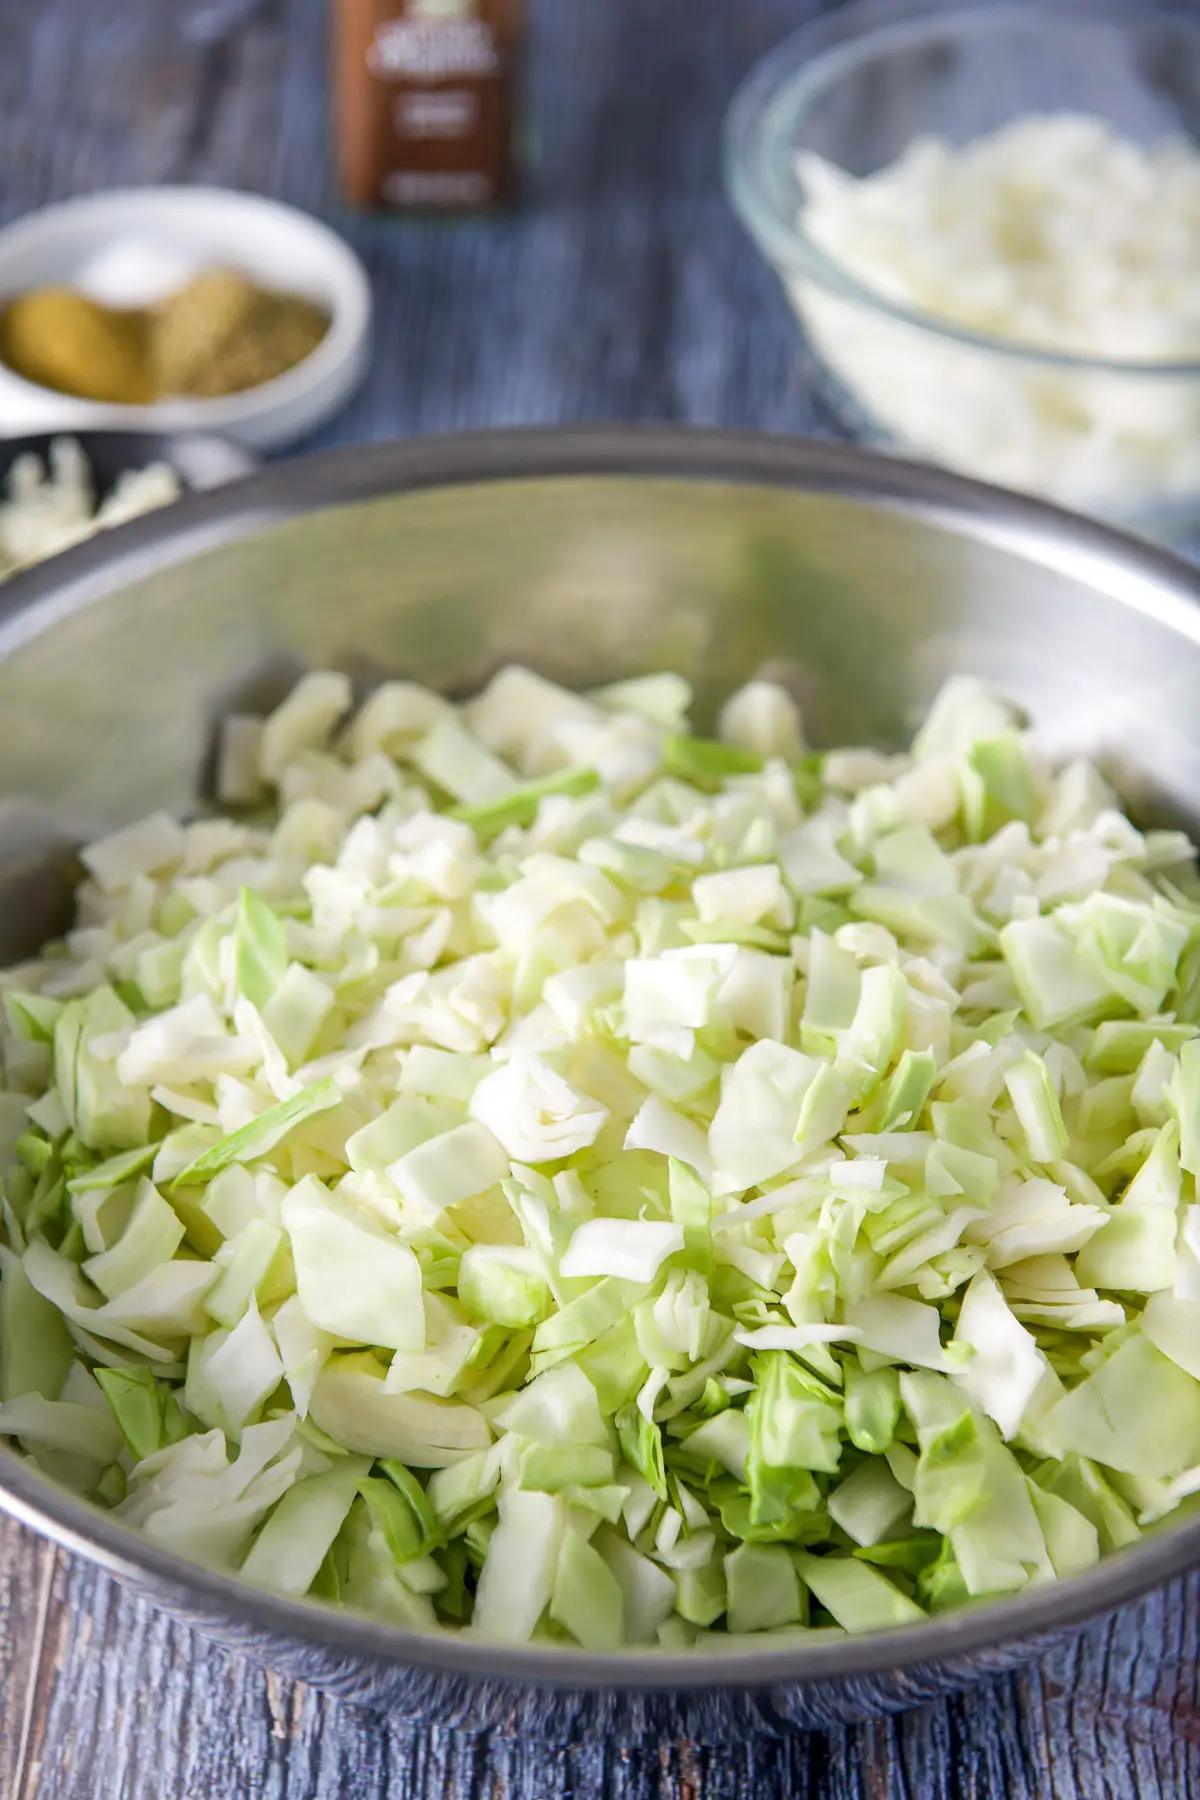 Raw cabbage chopped in a bowl, onions in a bowl and herbs in the back